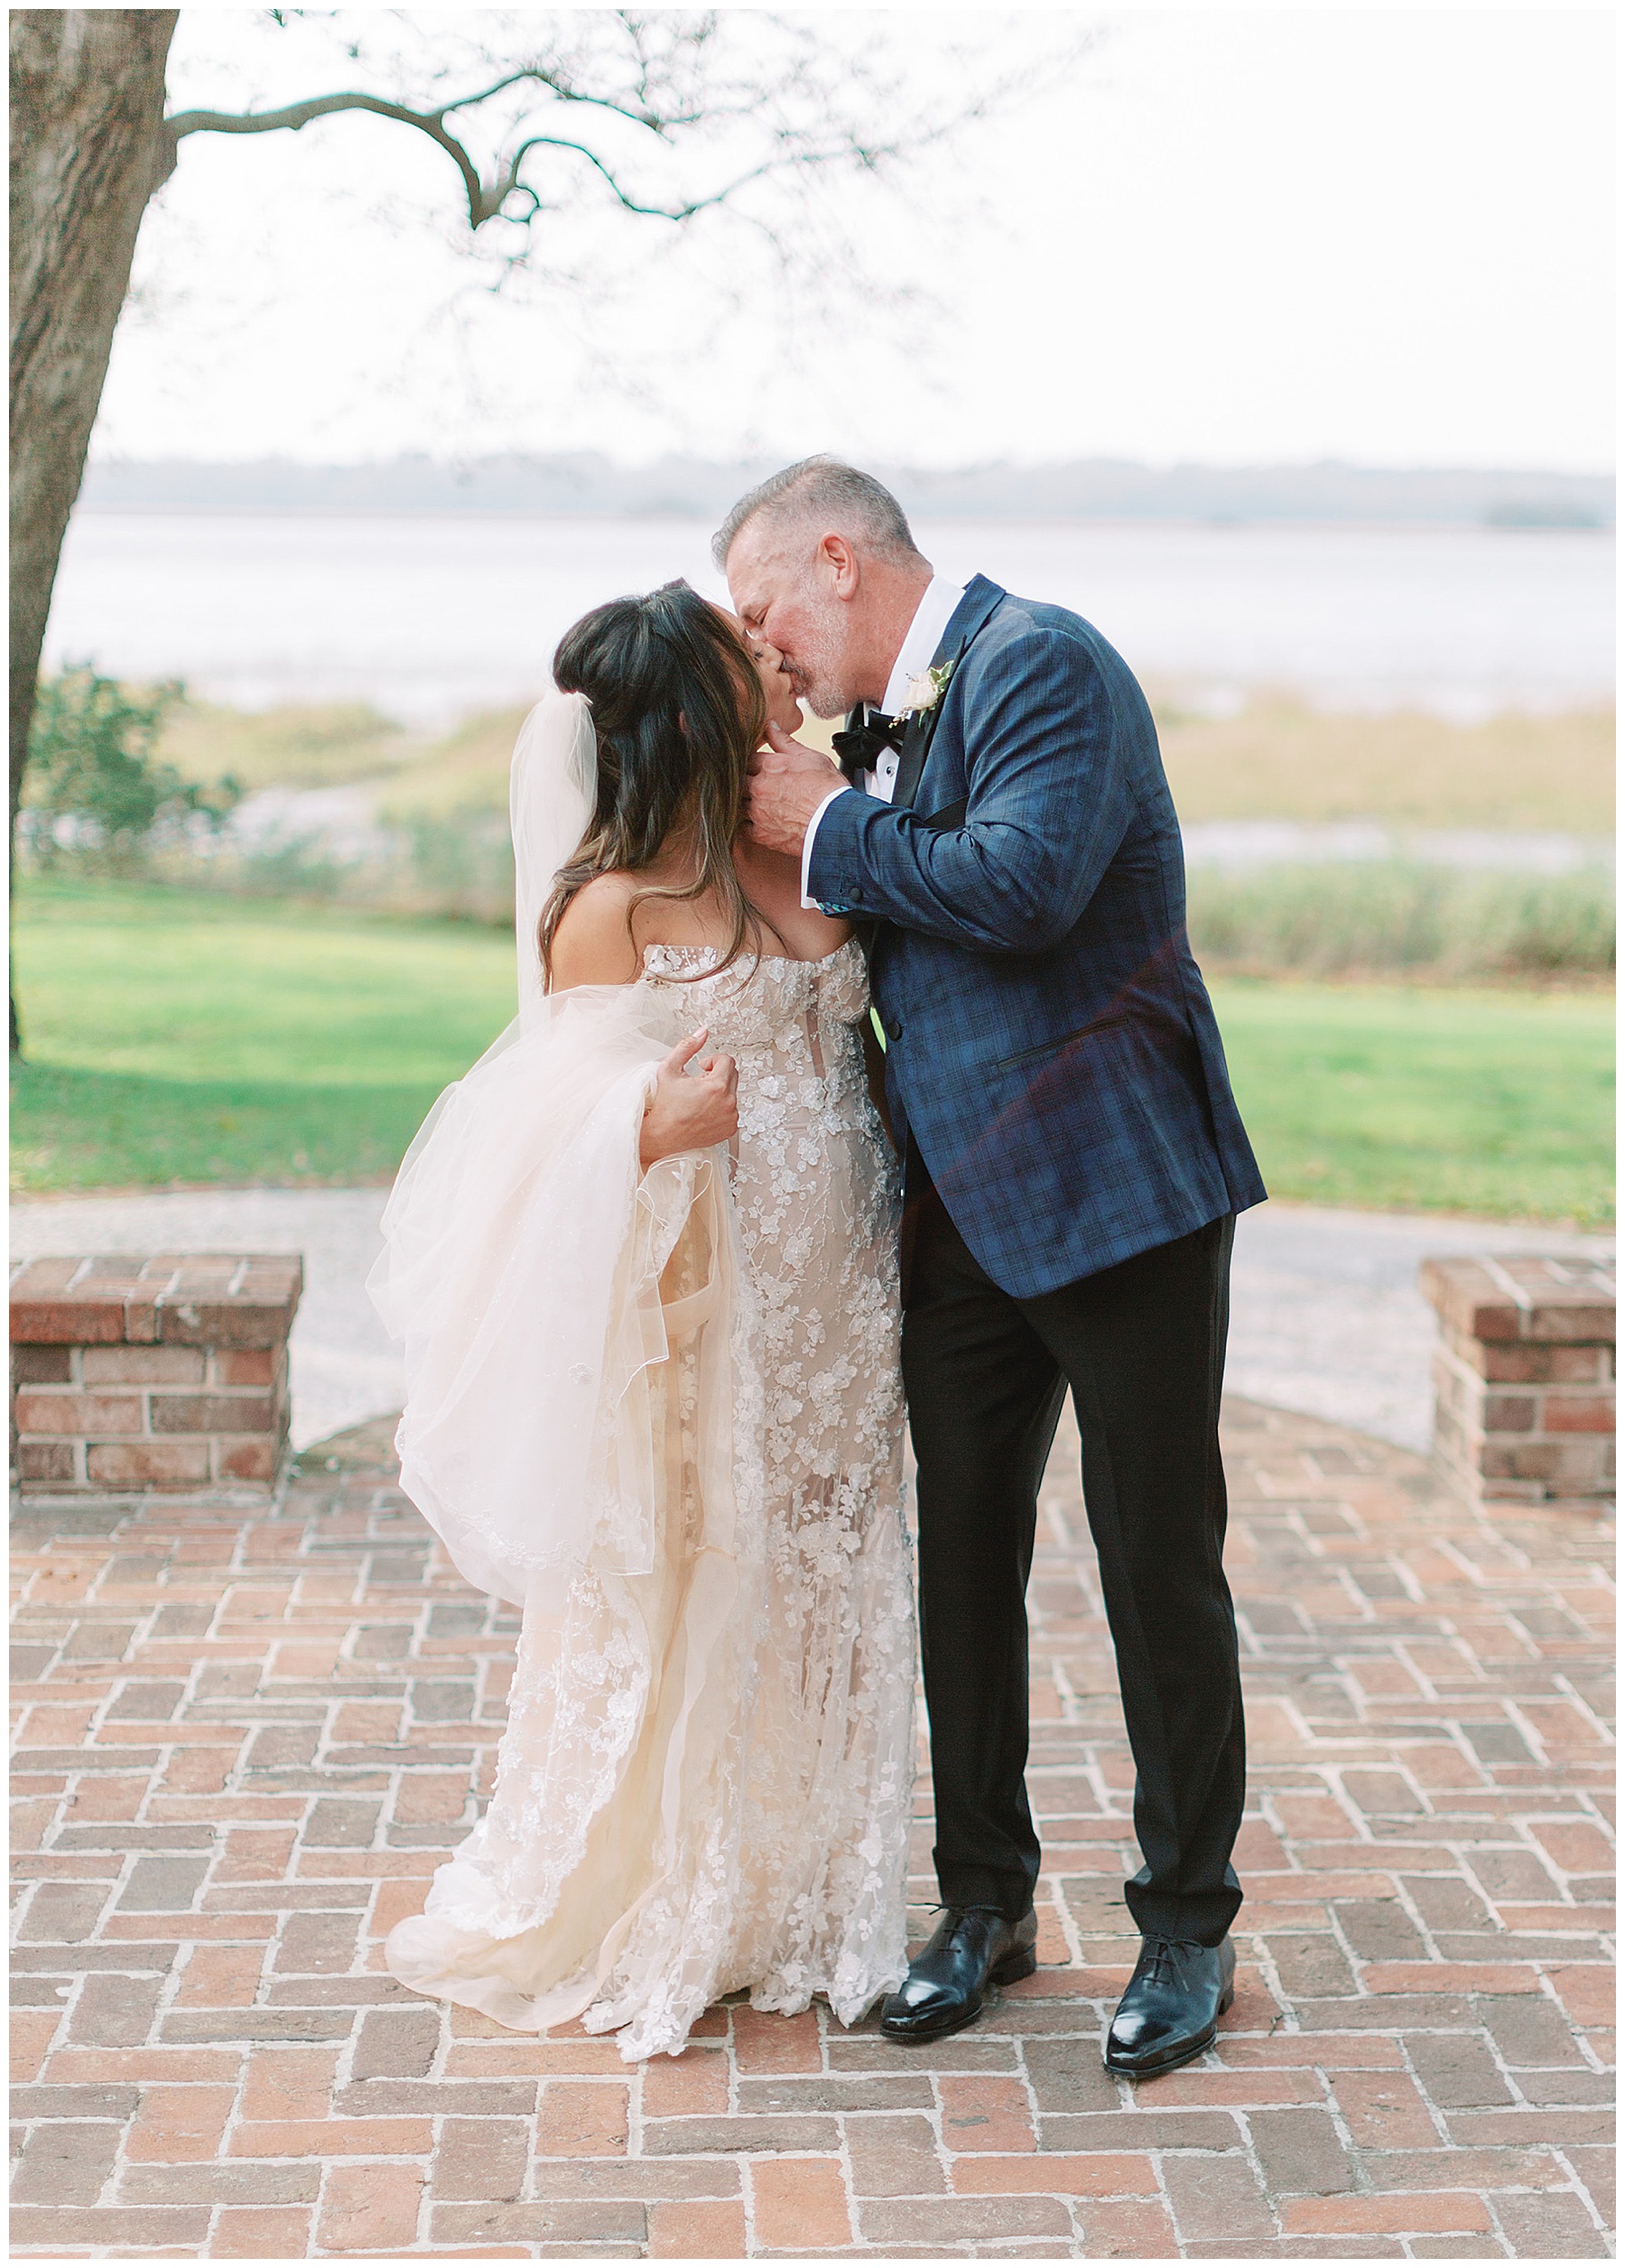 groom leans to kiss bride holding her cheek during springtime wedding day at Lowndes Grove